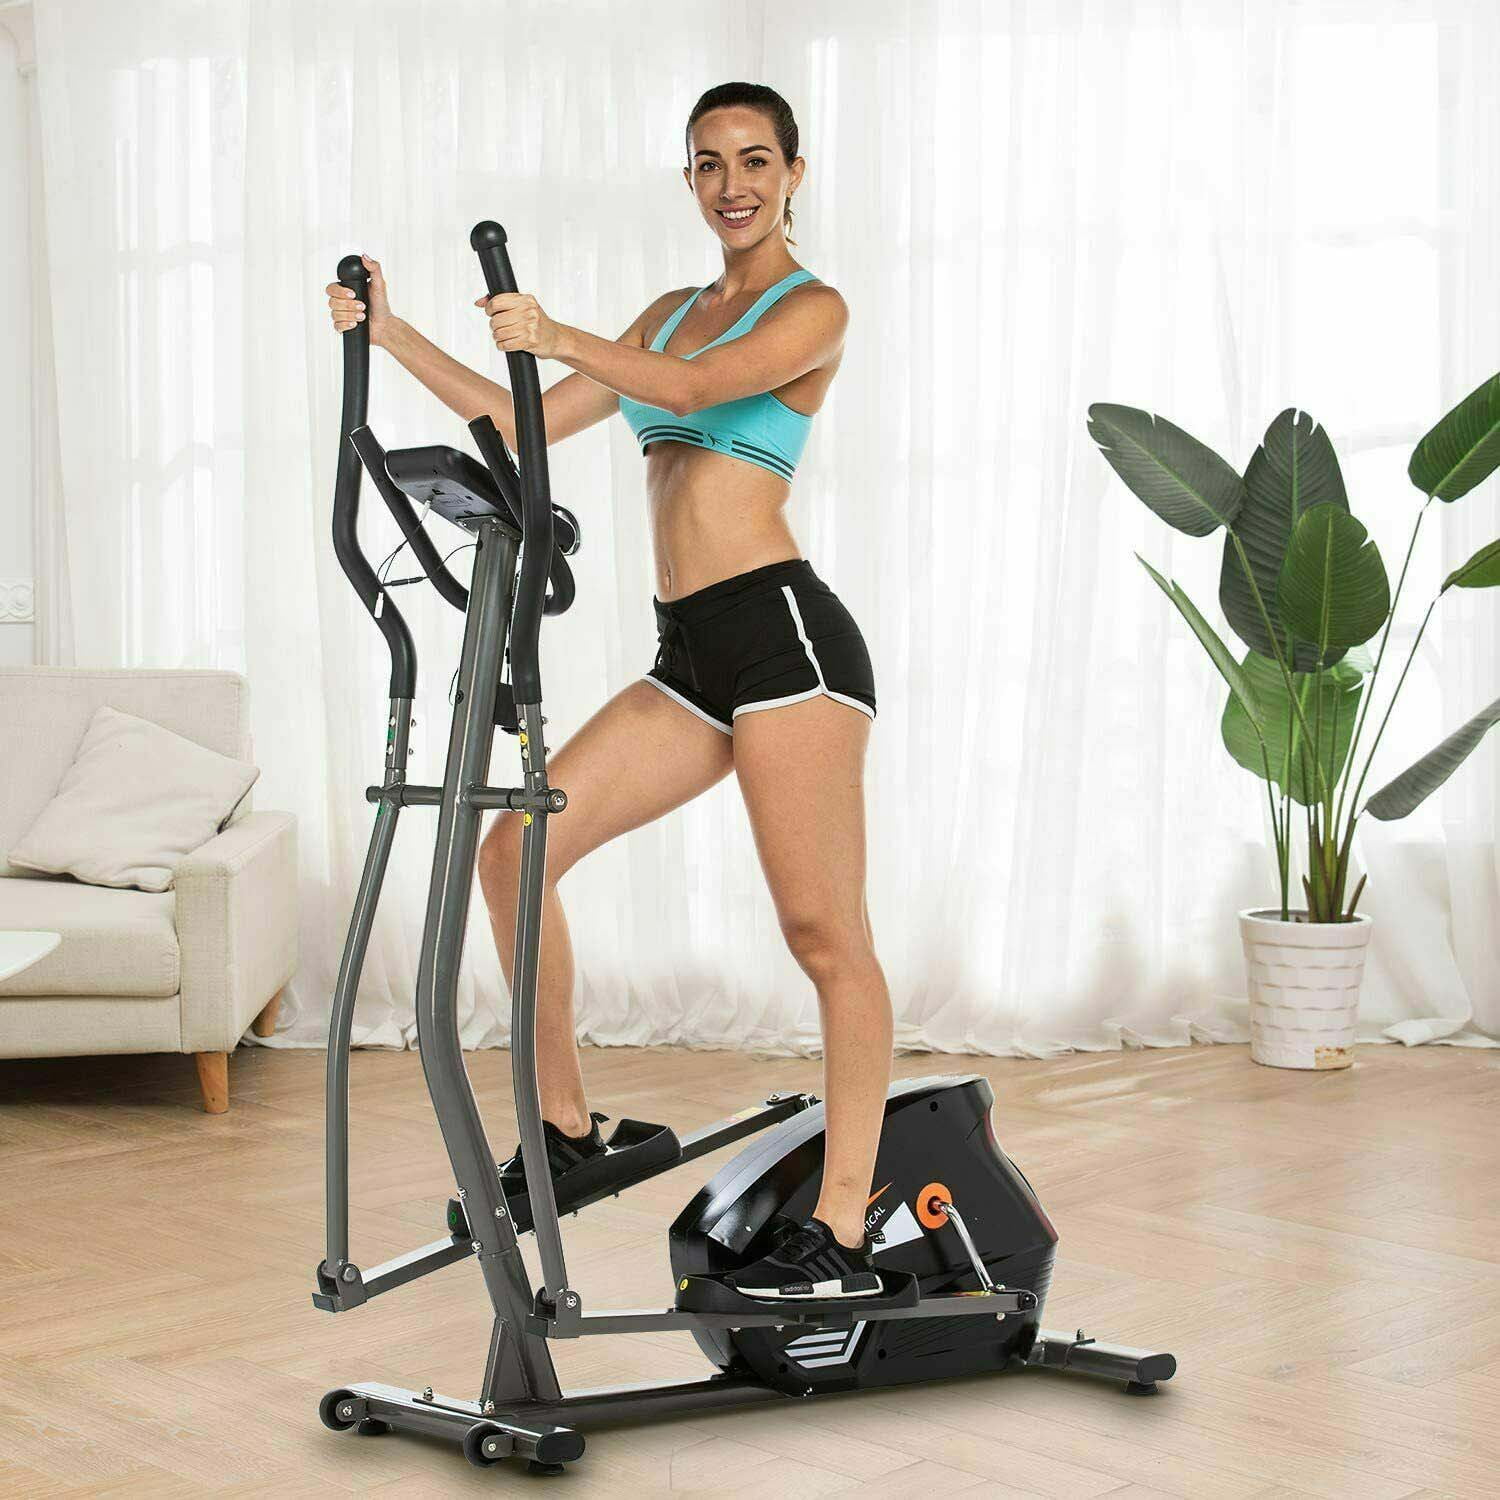 390 LB Max Weight FUNMILY E970 Electric Elliptical Trainers 16 Levels Resistance Fitness Eliptical Exercise Machines with 13 Workout Programs Programmable Monitor and Pulse Rate Grips 